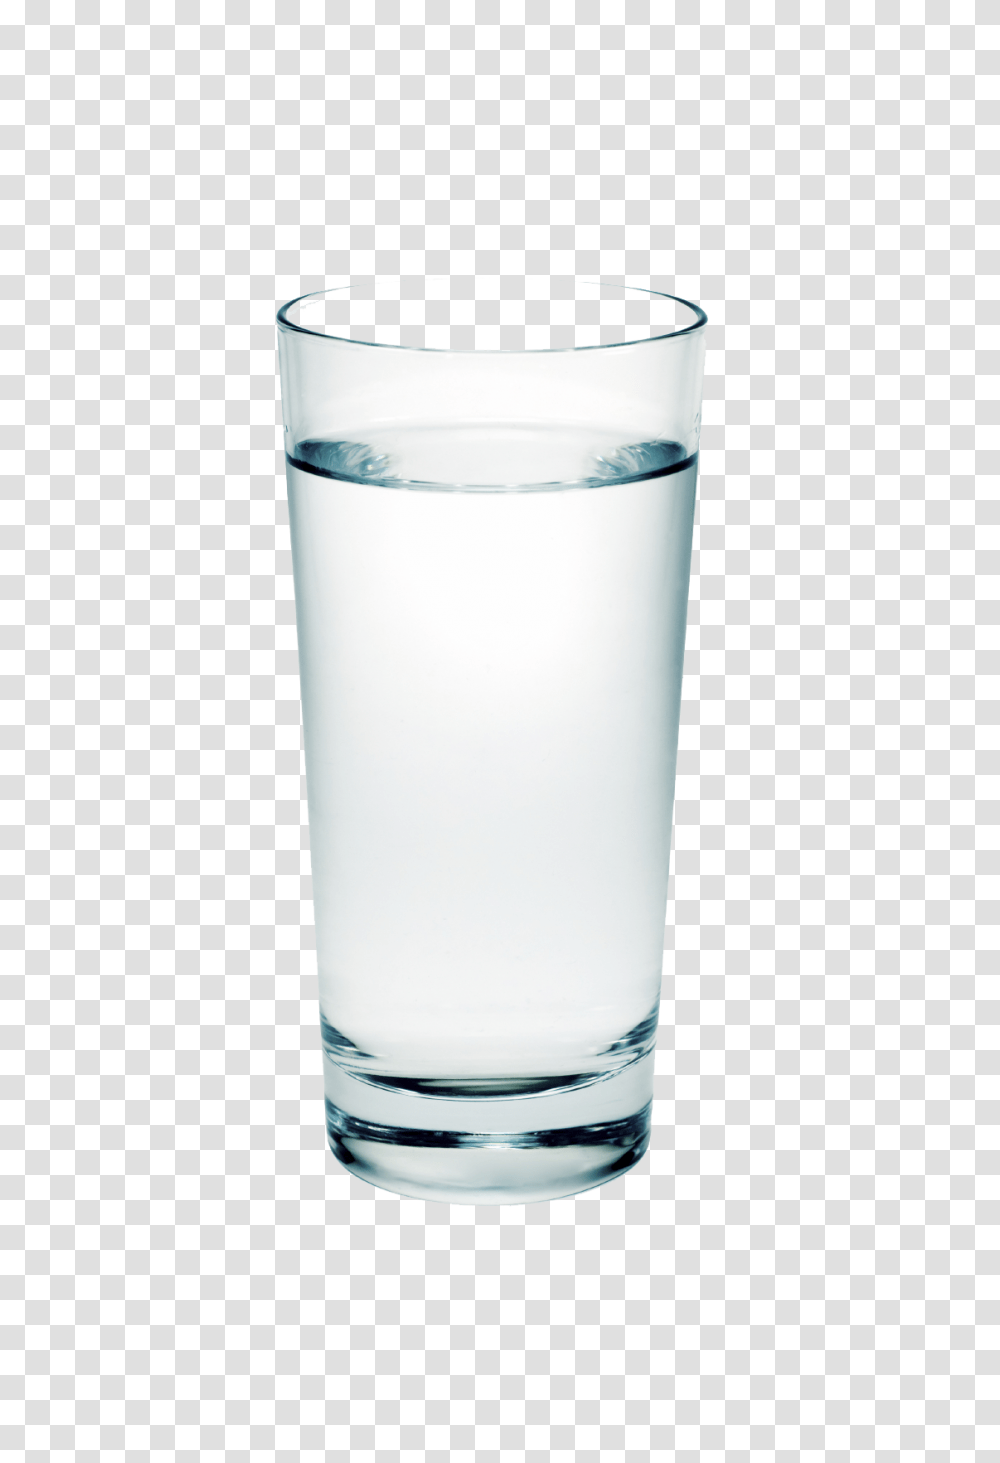 Download Hd Water Cup Pic Glass Of Water, Shaker, Bottle, Beverage, Drink Transparent Png